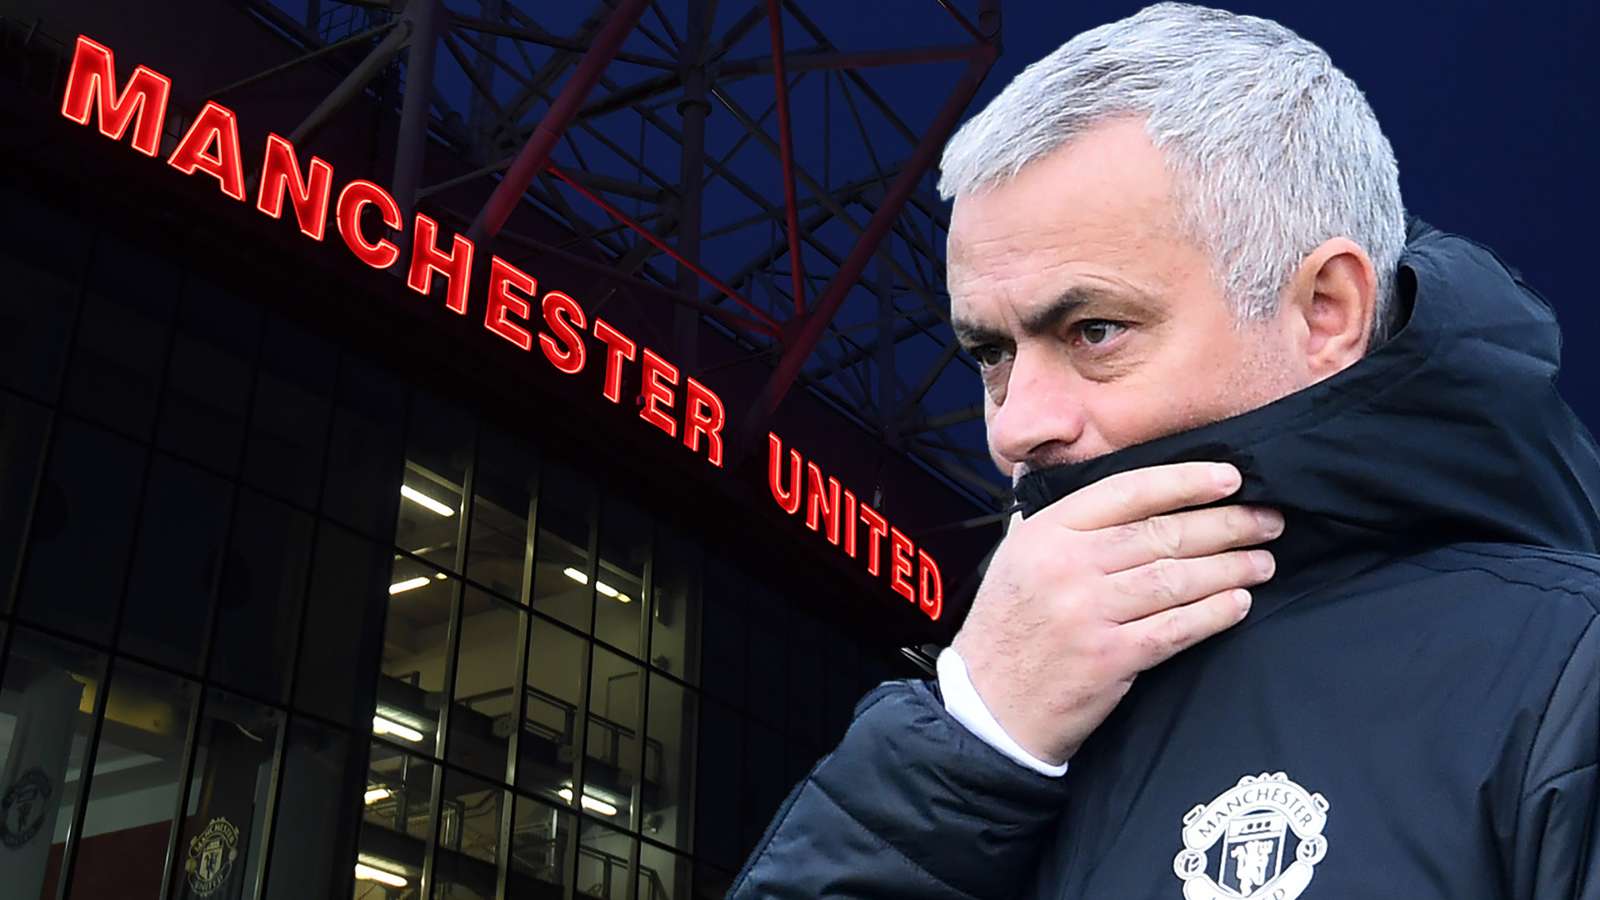 Jose Mourinho sacked by Manchester United - BREAKING NEWS 2